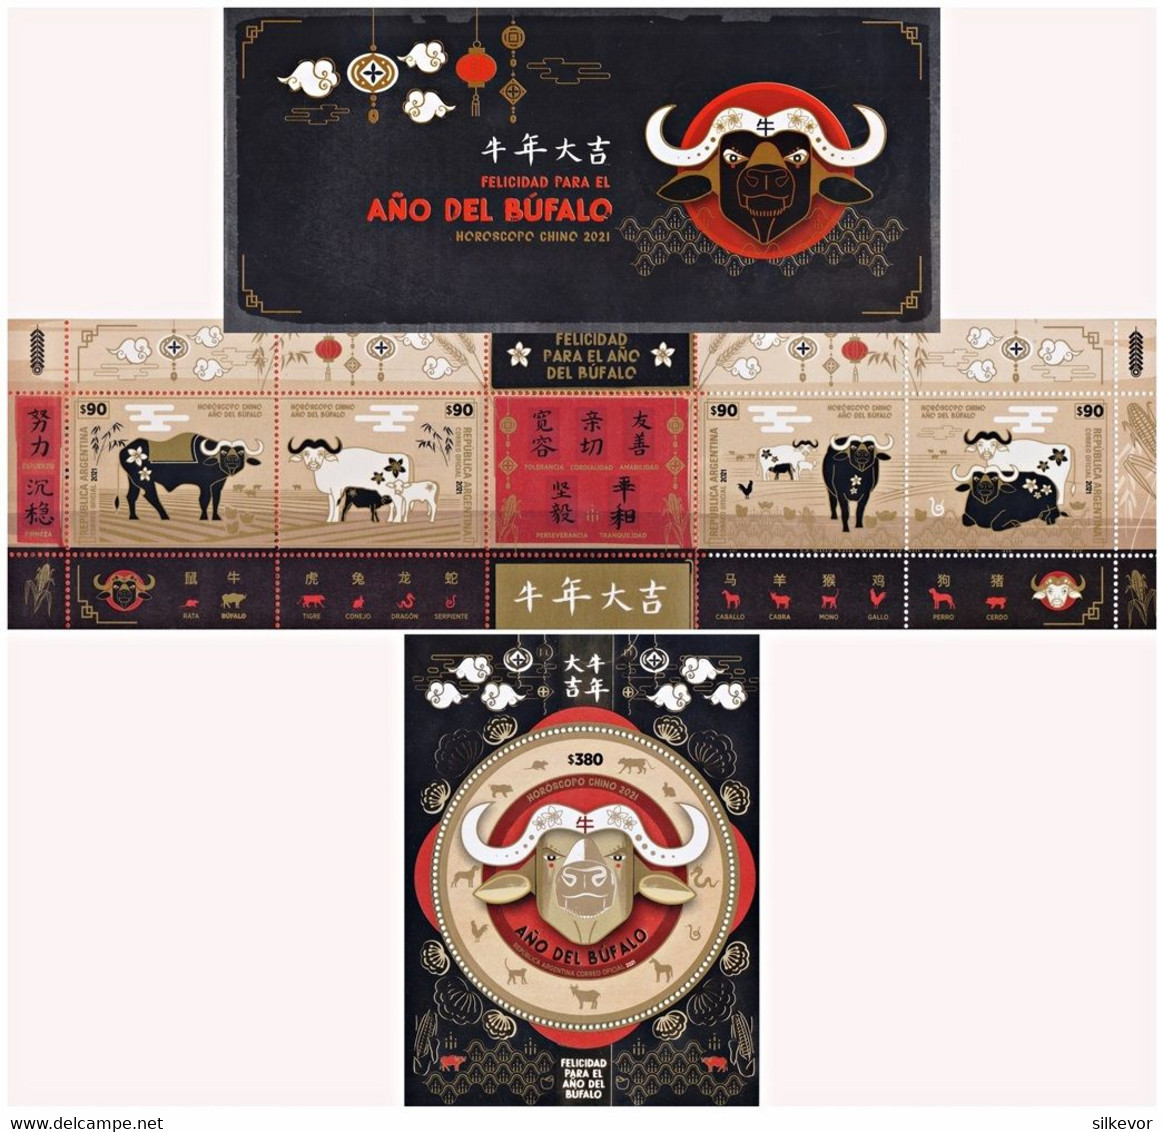 ARGENTINA-2021-STAMPS-YEAR OF THE BUFALO-CHINESE HOROSCOPE- BOOKLET + SOUVENIR SHEET-MNH- SEE IMAGE!! - Nuevos